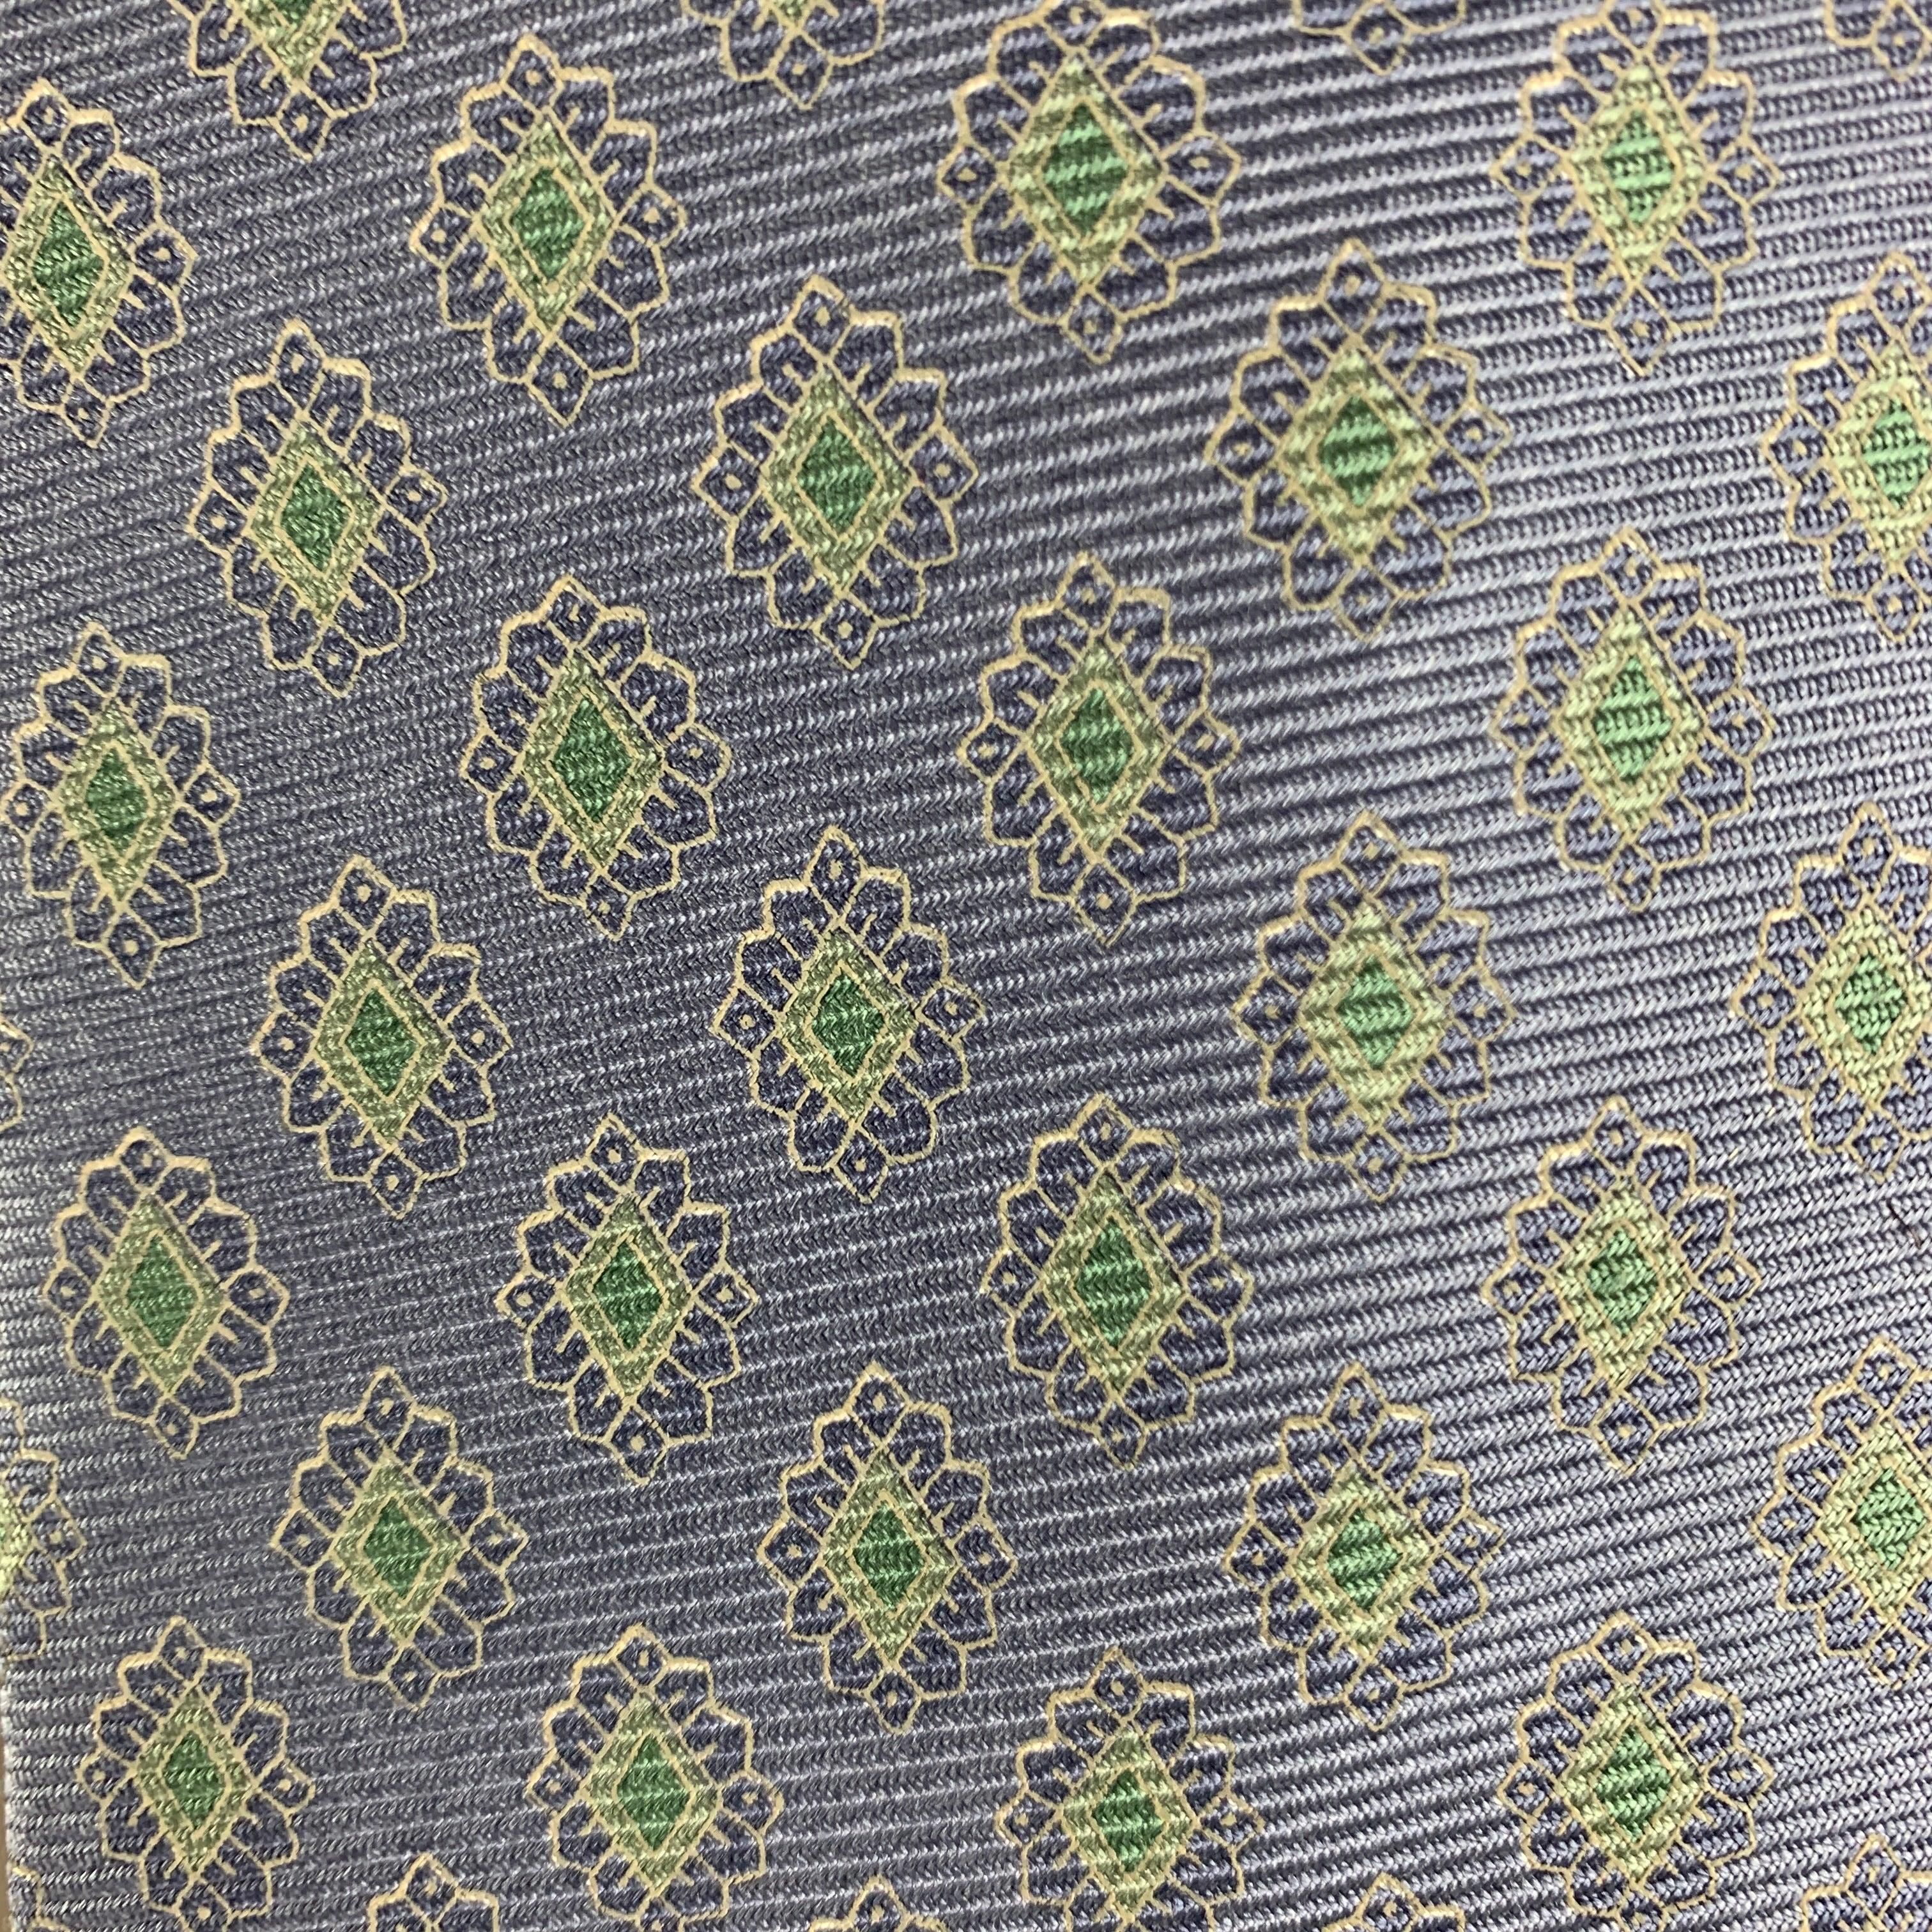 ERMENEGILDO ZEGNA necktie comes in blue featuring a green rhombus pattern. 100% silk. Made in Italy.
Very Good Pre-Owned Condition.
 

Measurements: 
  Width: 3 inches Length: 58 inches 




  
  
 
Reference: 124755
Category: Tie
More Details
   